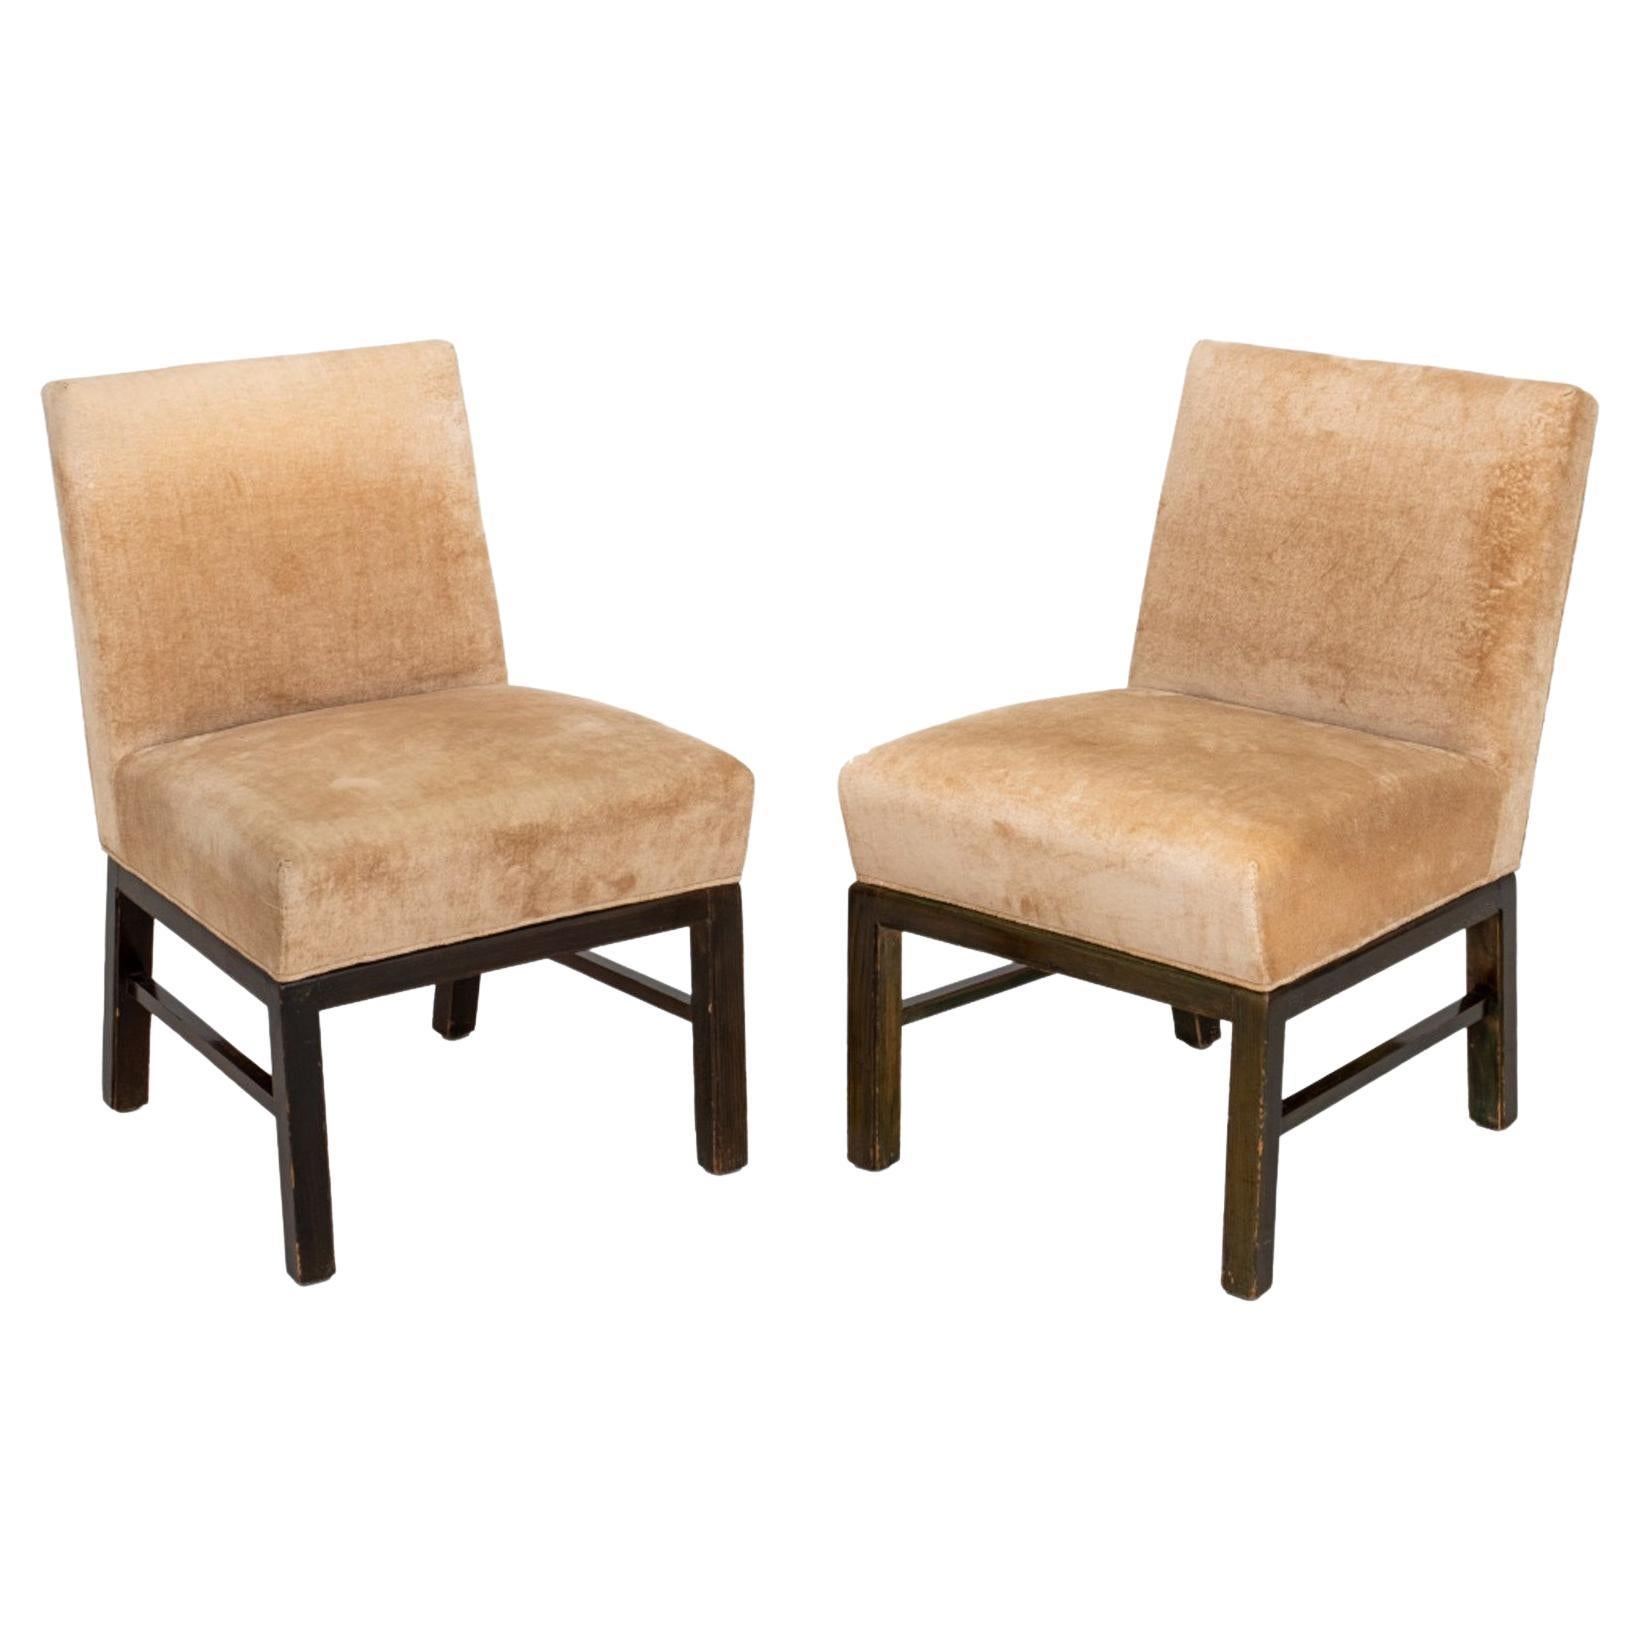 Upholstered Slipper Chairs, Pair For Sale